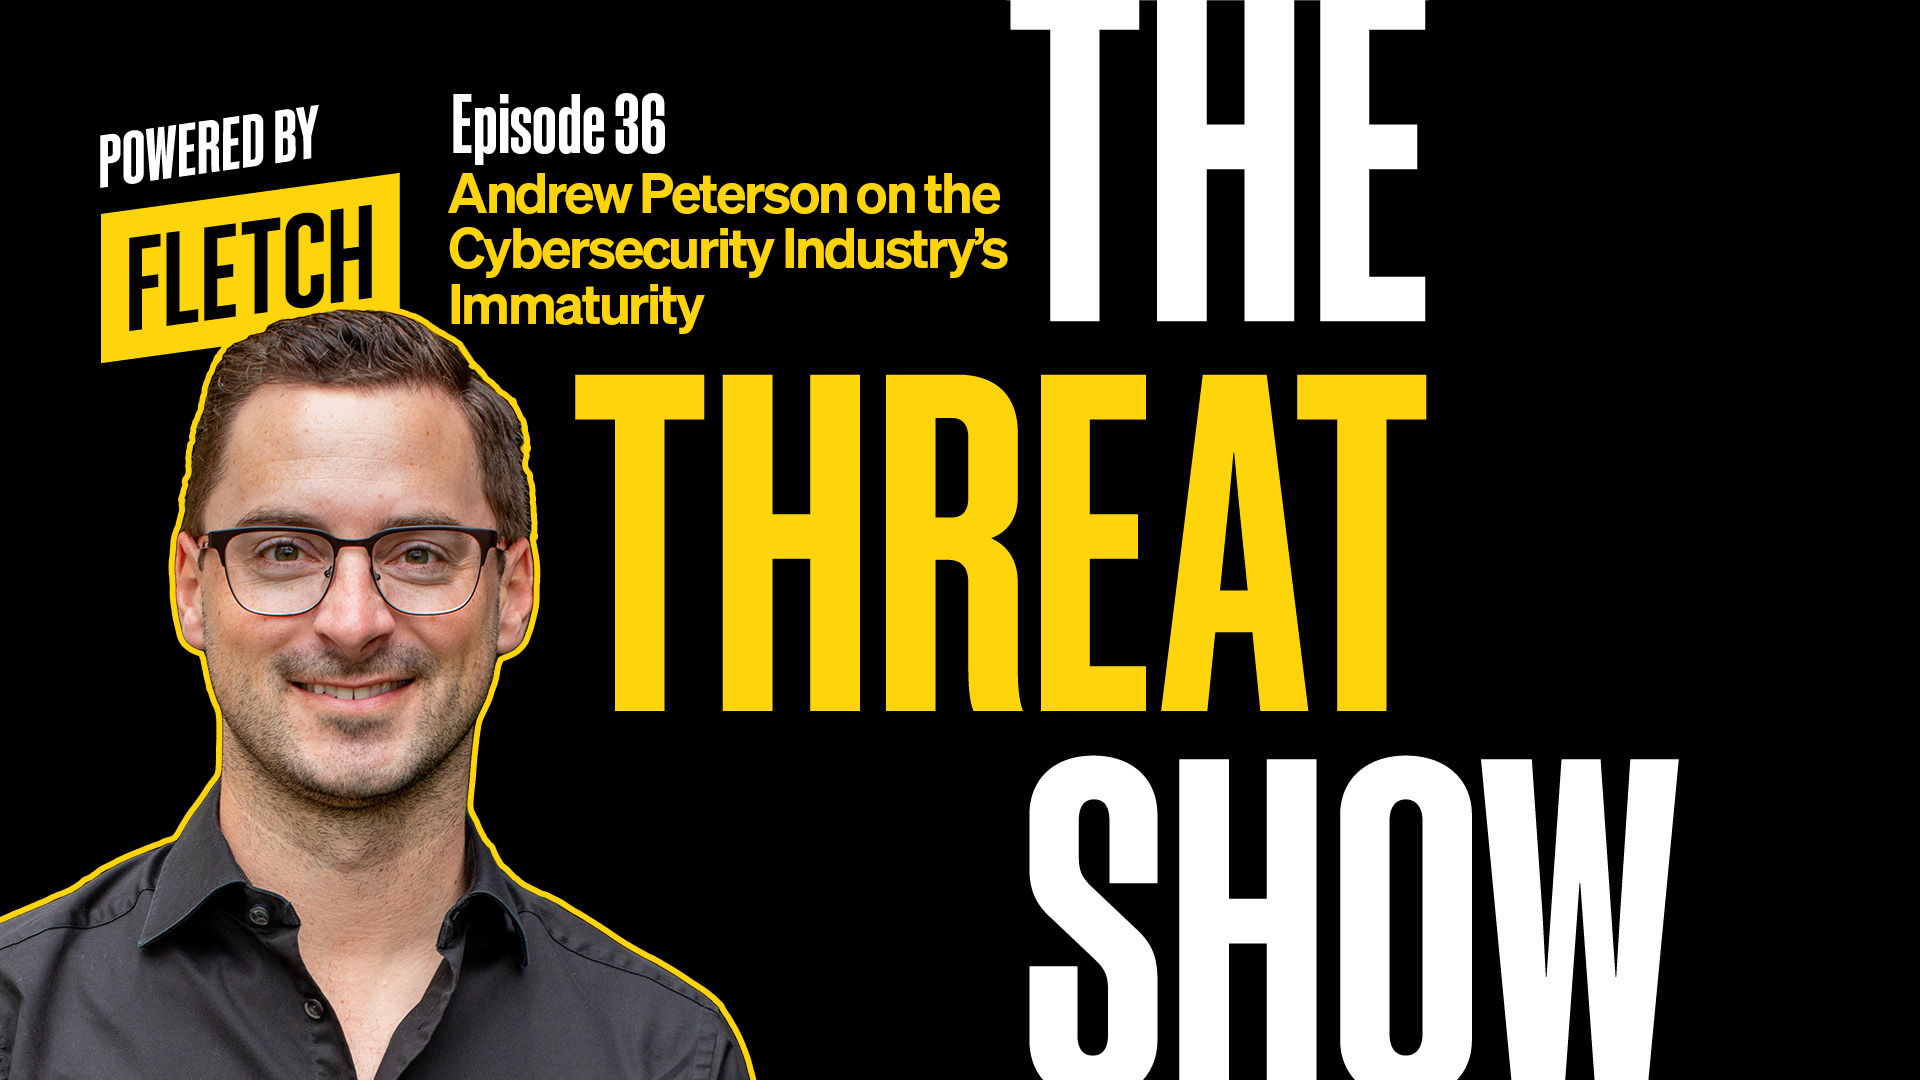 The Threat Show Ep. 36 w/ Andrew Peterson